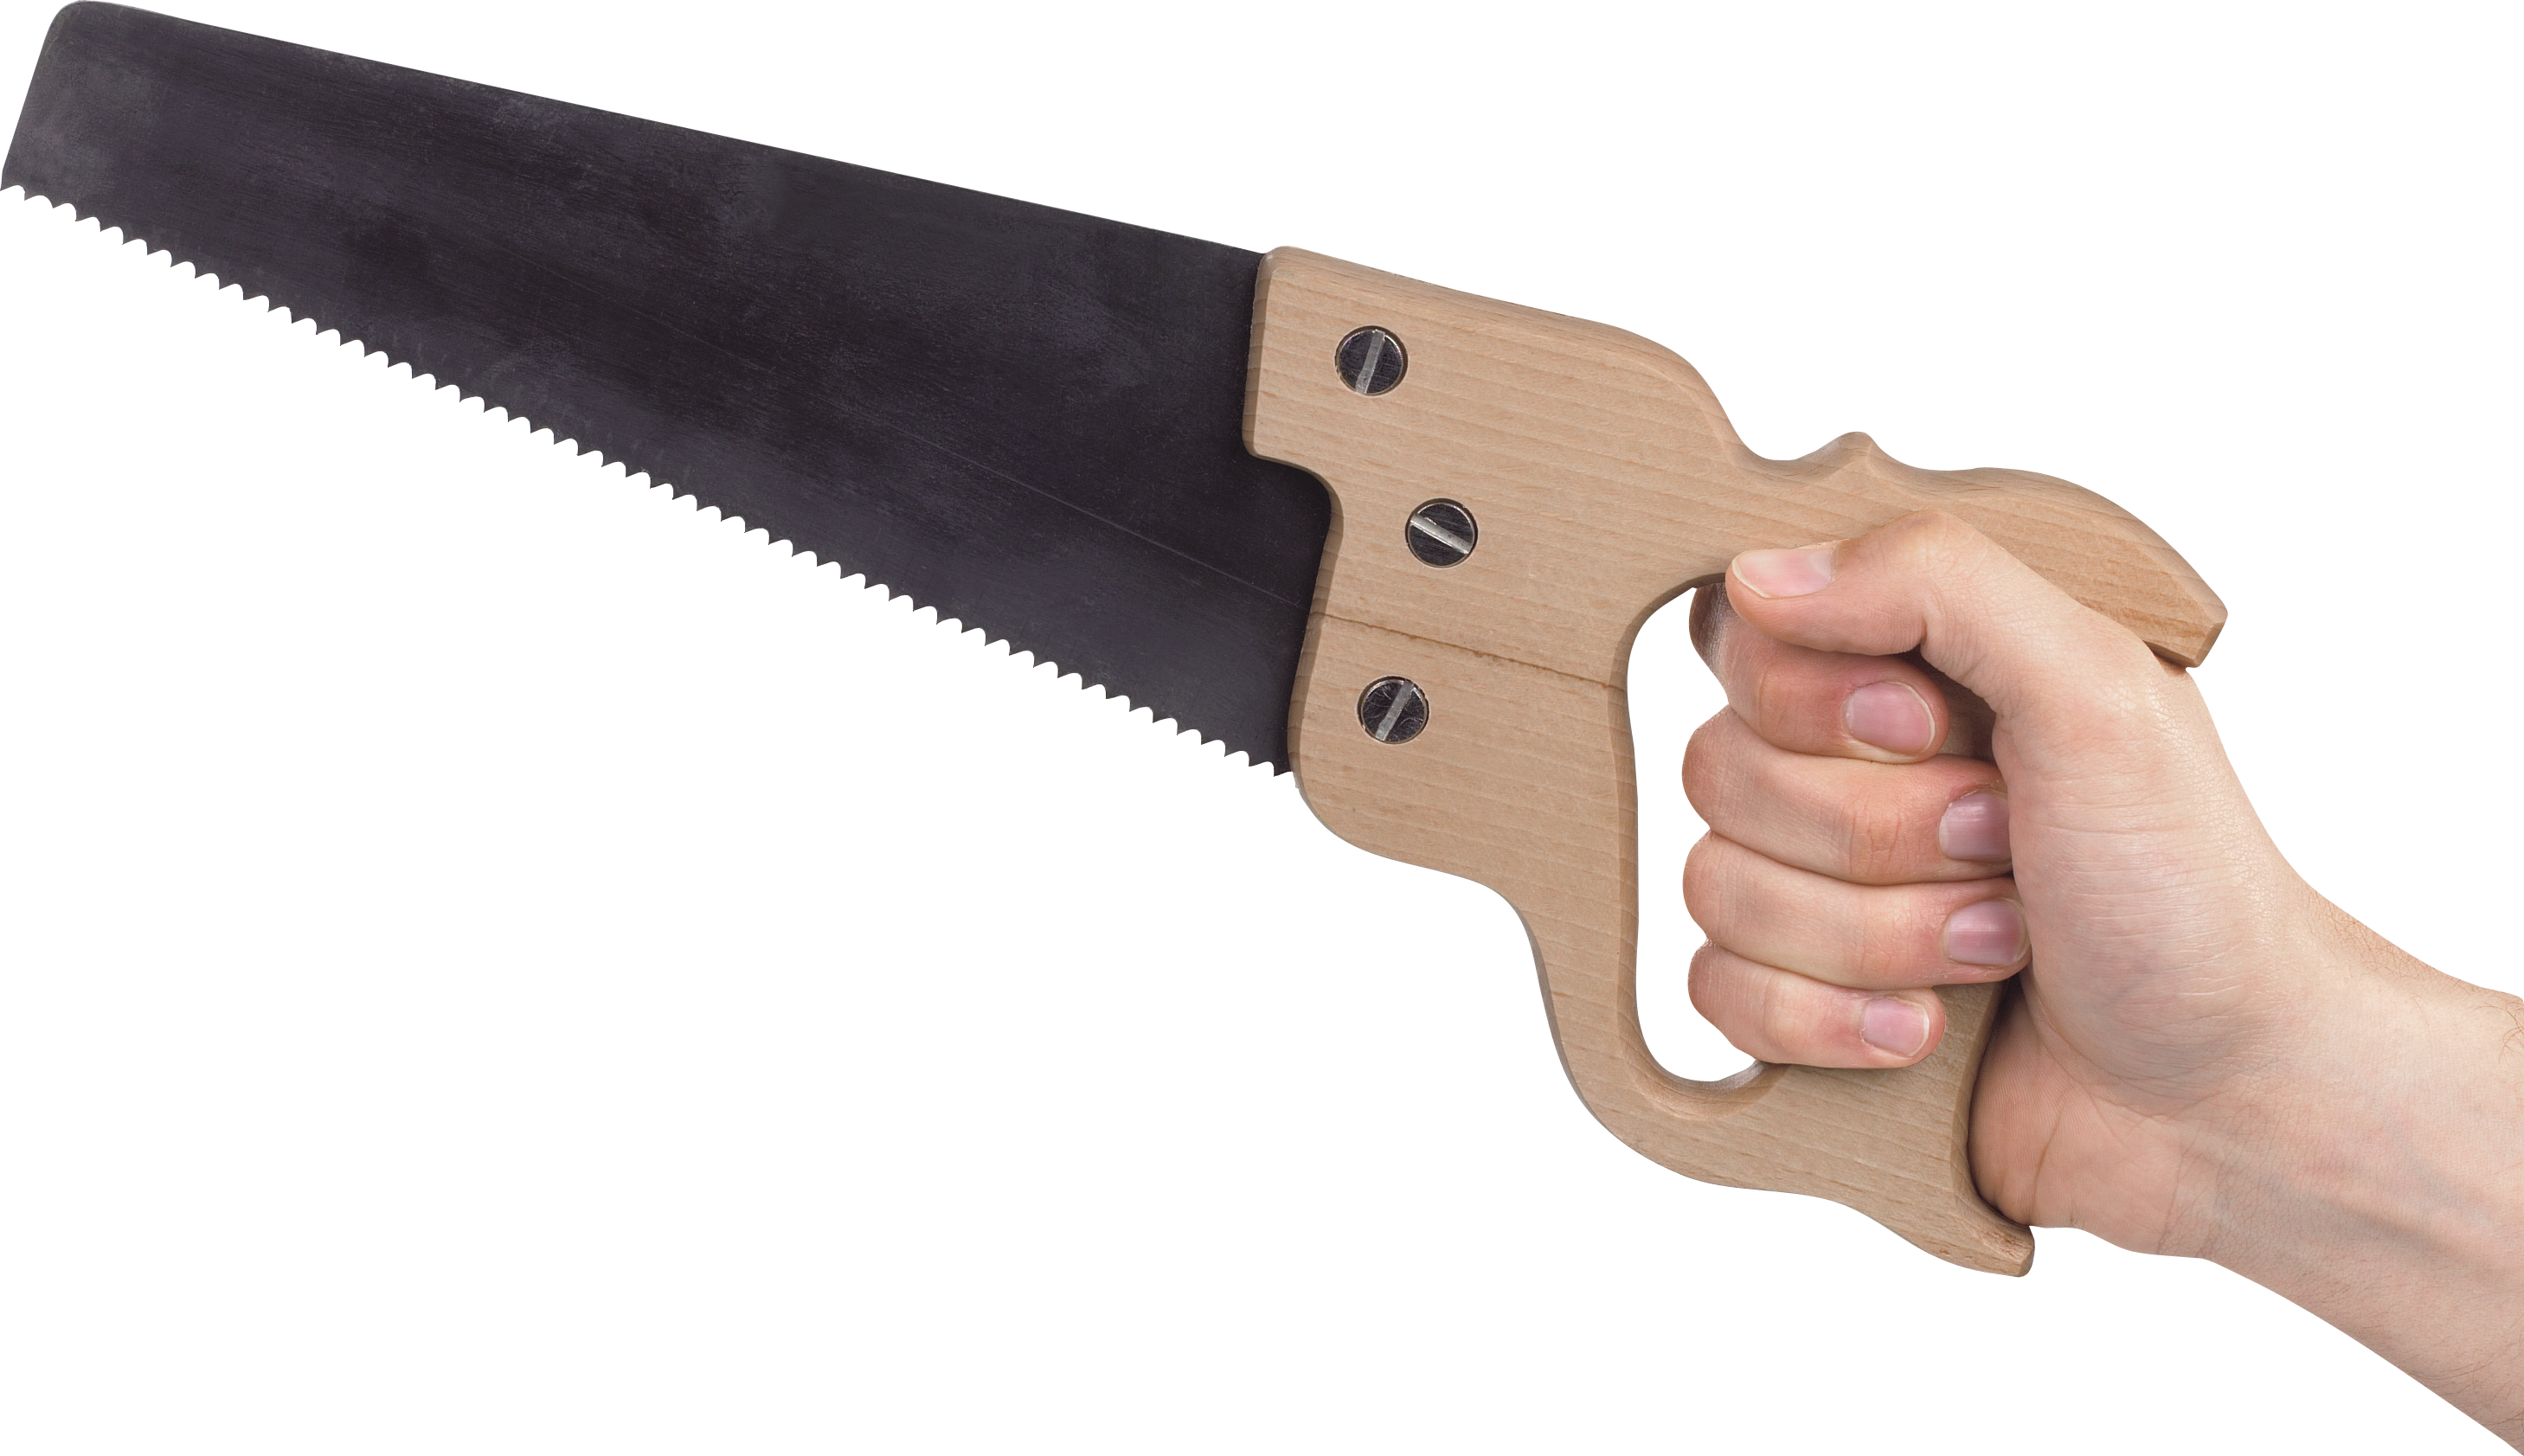 Hand saw in hand PNG image